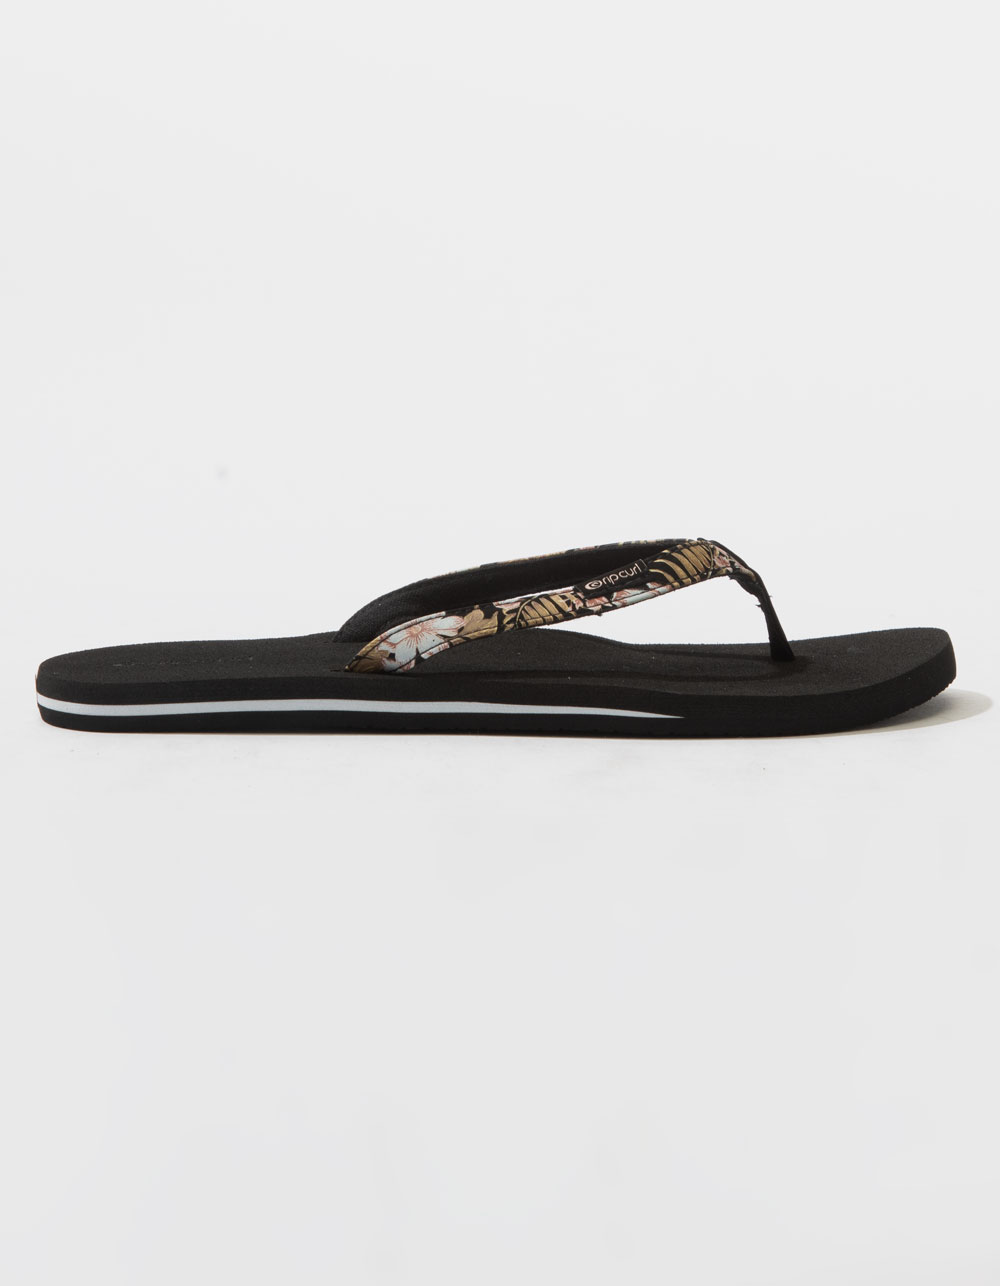 RIP CURL Freedom Womens Sandals - BLACK COMBO | Tillys